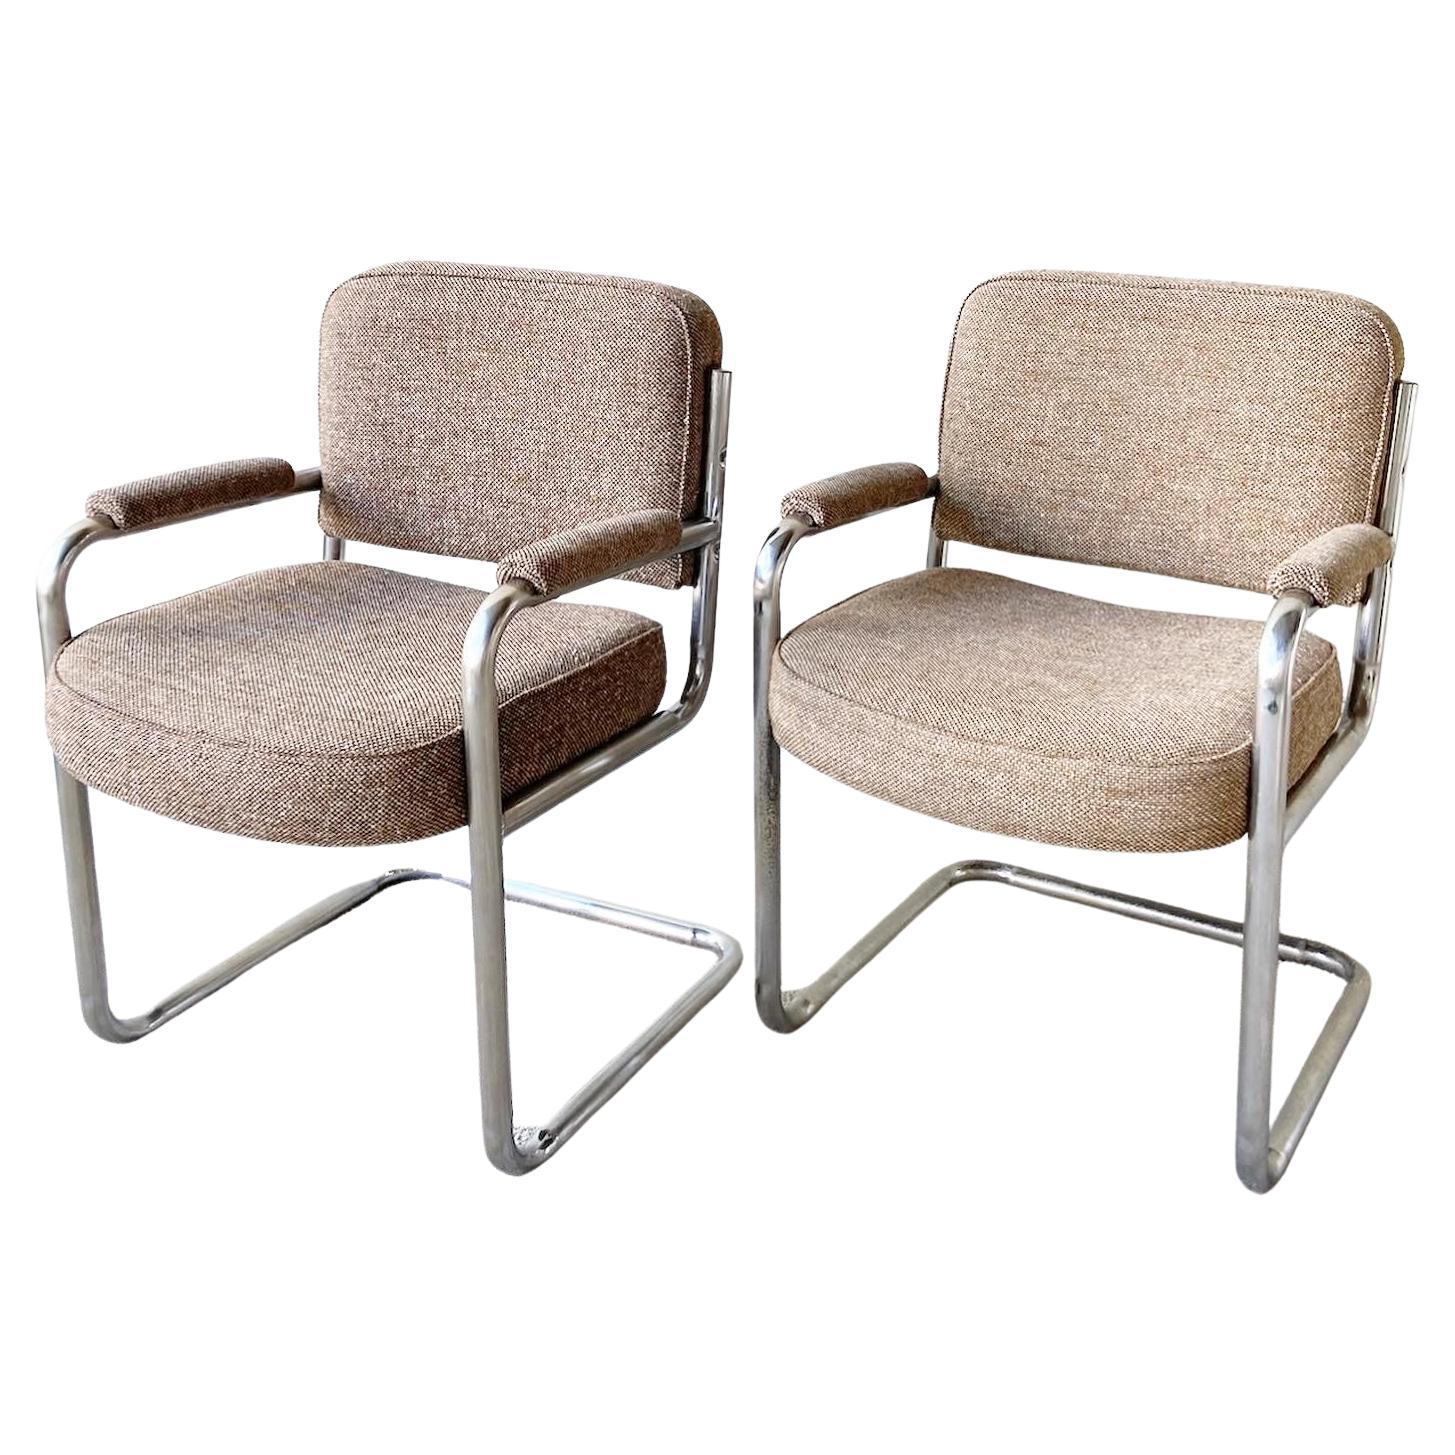 Mid-Century Modern Cantilever Arm Chairs, a Pair